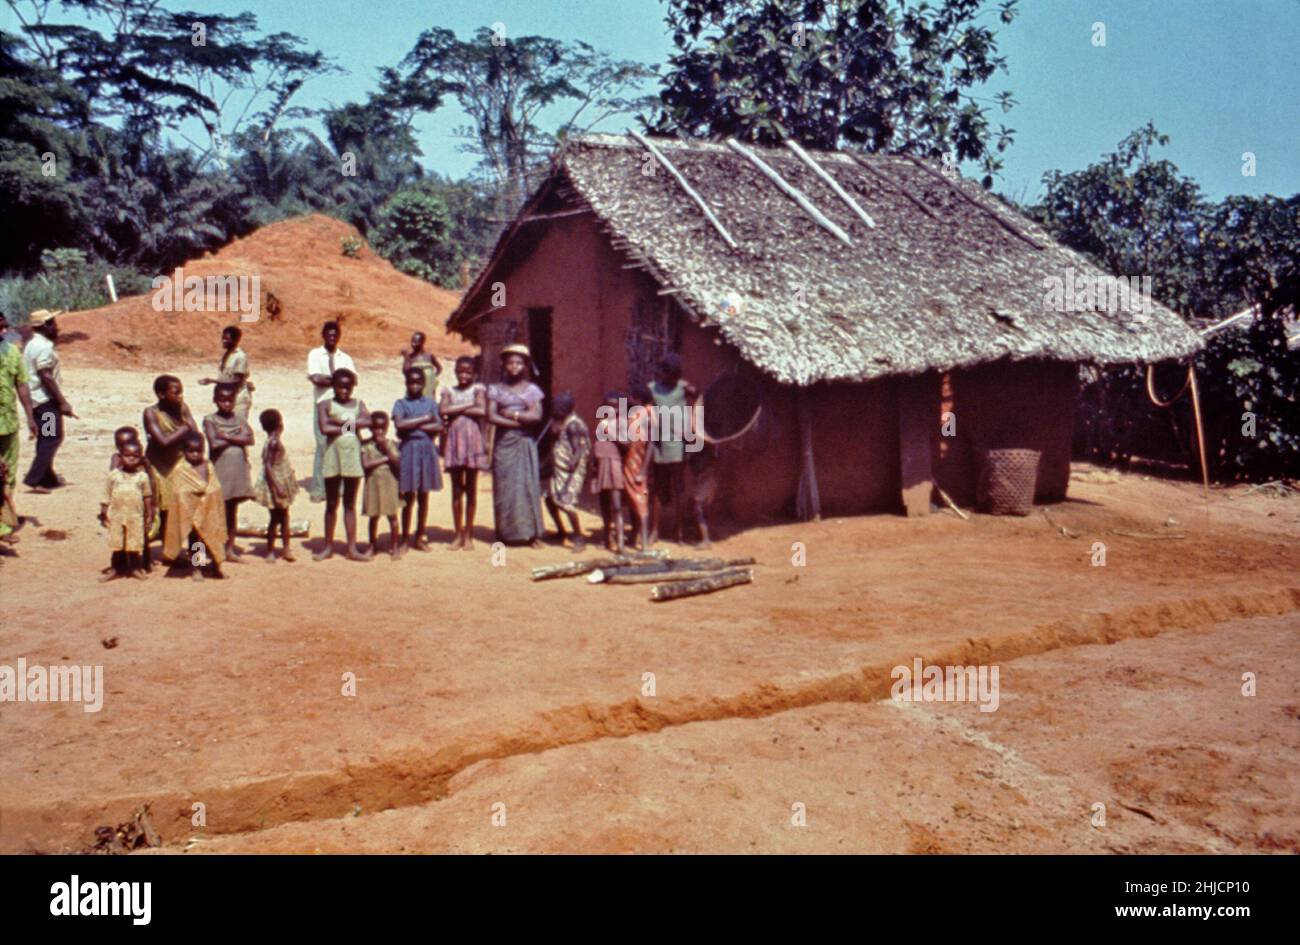 Residents in Yambuku, Zaire (now Democratic Republic of the Congo) who were being examined by CDC EIS officers during the Ebola outbreak in 1976. Ebola virus infections were first recognized in 1976, when simultaneous but separate outbreaks of human disease caused by two distinct virus subtypes erupted in northern Zaire and southern Sudan and resulted in hundreds of deaths. Stock Photo